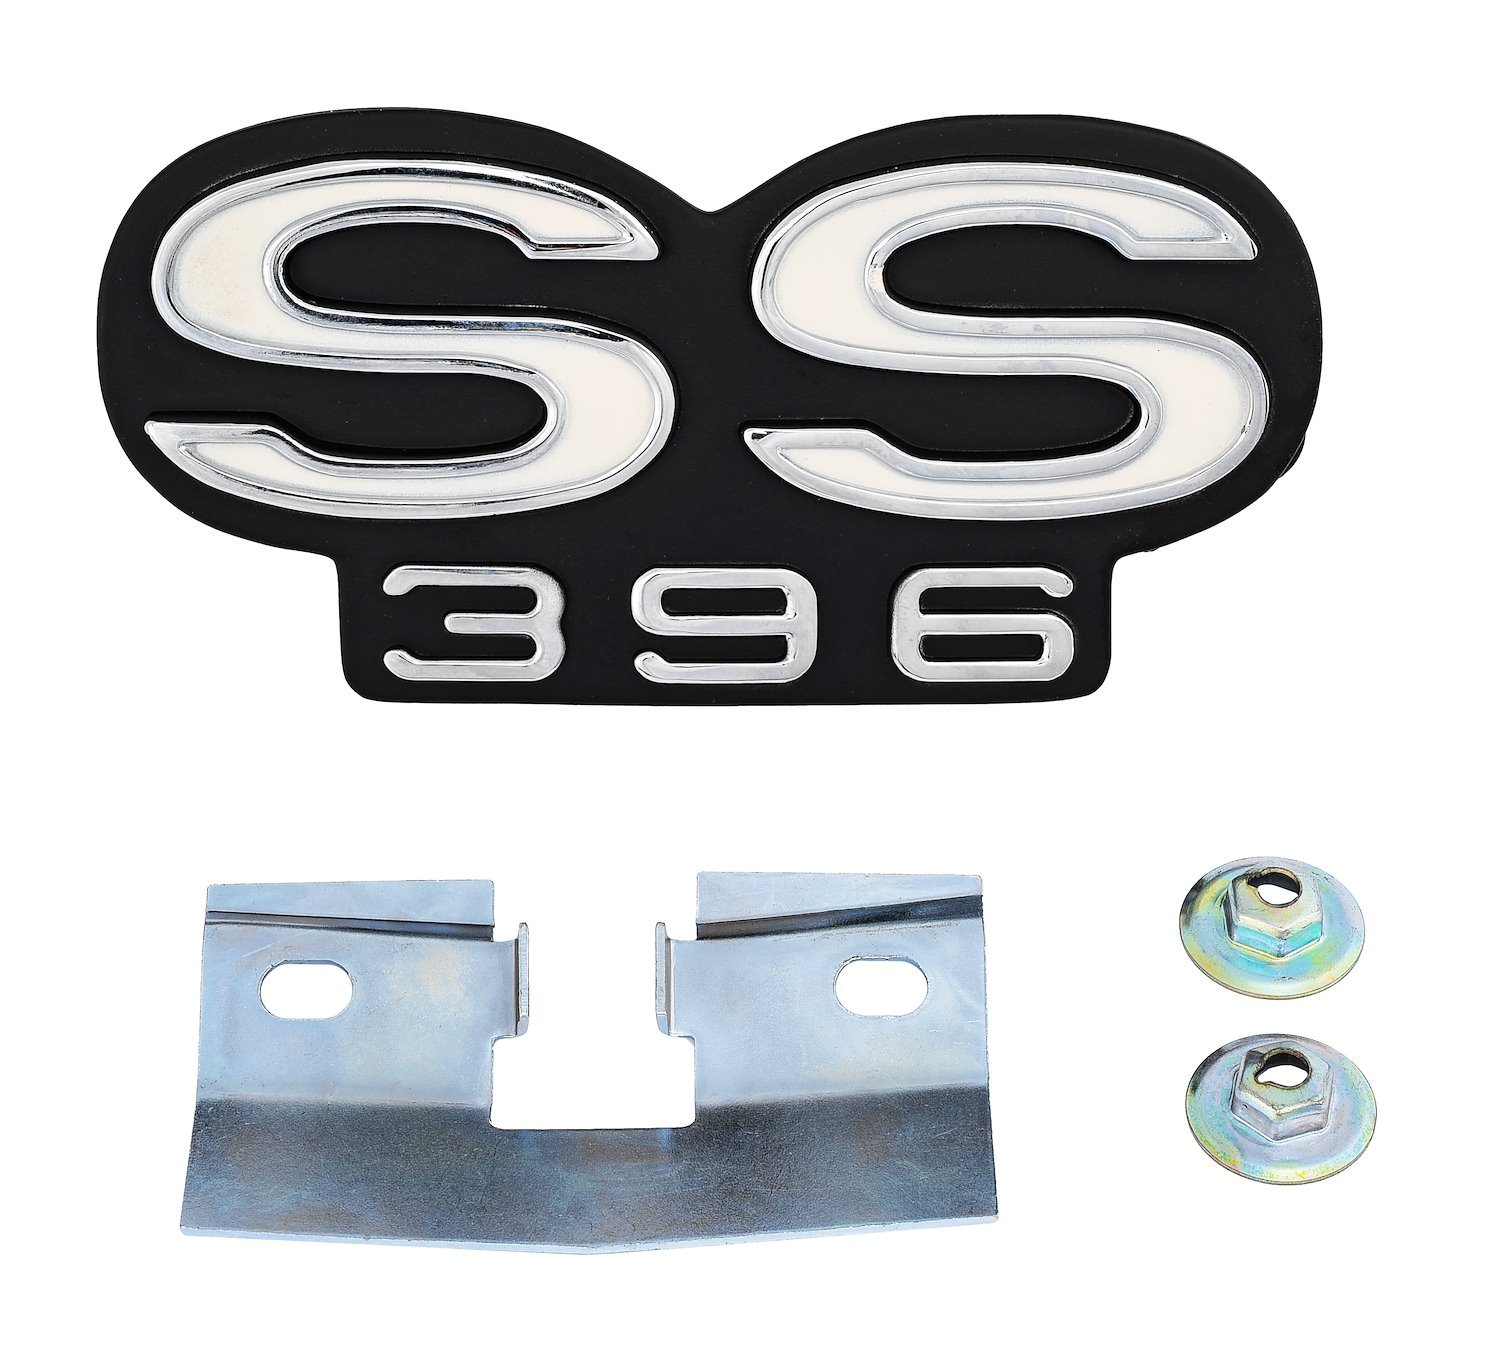 SS 396 Grille Emblem for 1967 Chevrolet Chevelle, El Camino SS 396